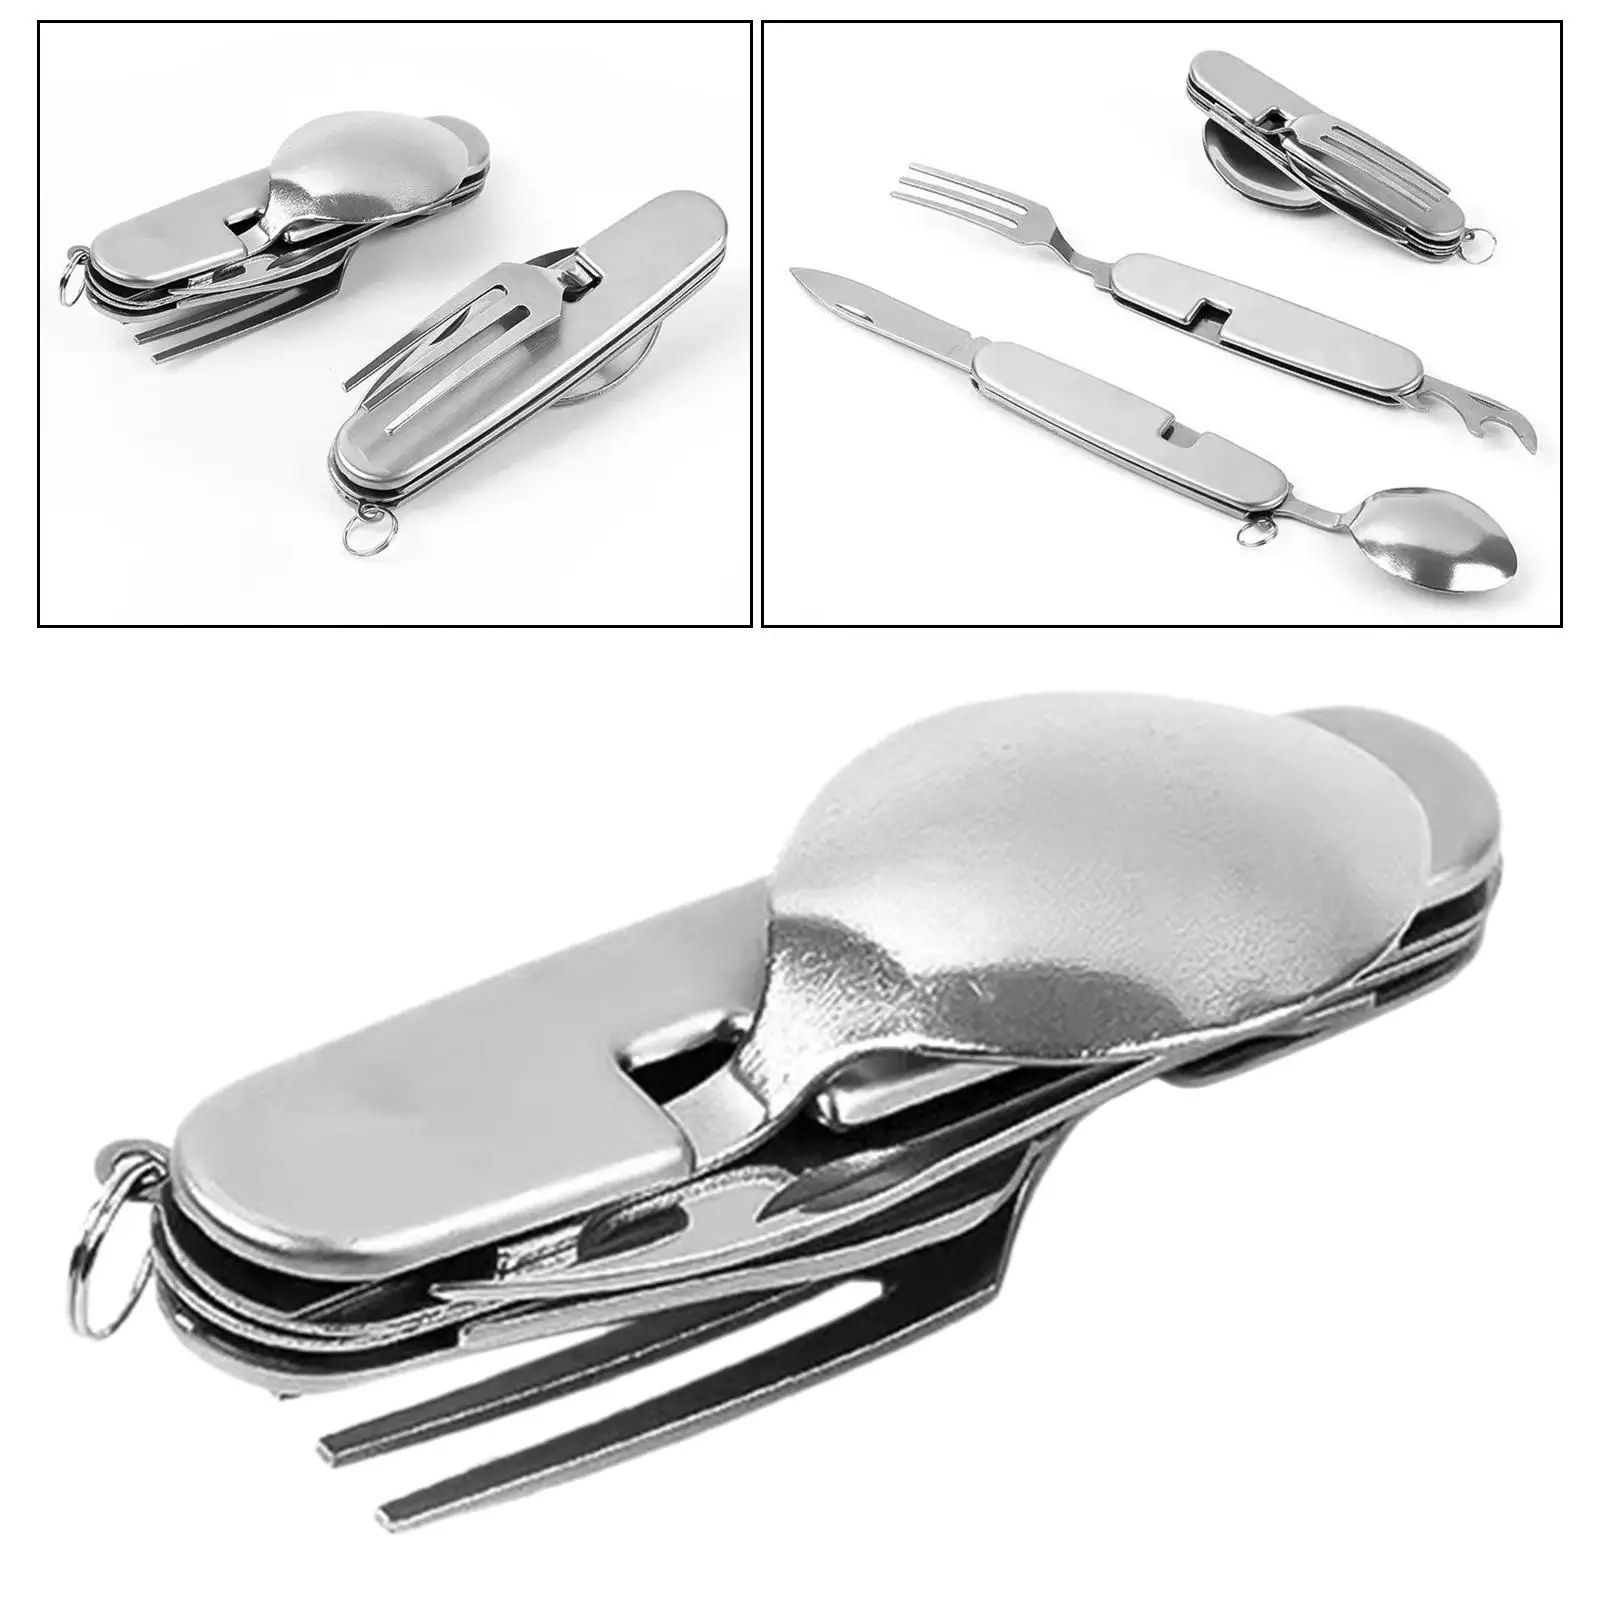 5 in 1 Camping Utensils Compact Detachable Eating Multi Tool for BBQ Hiking